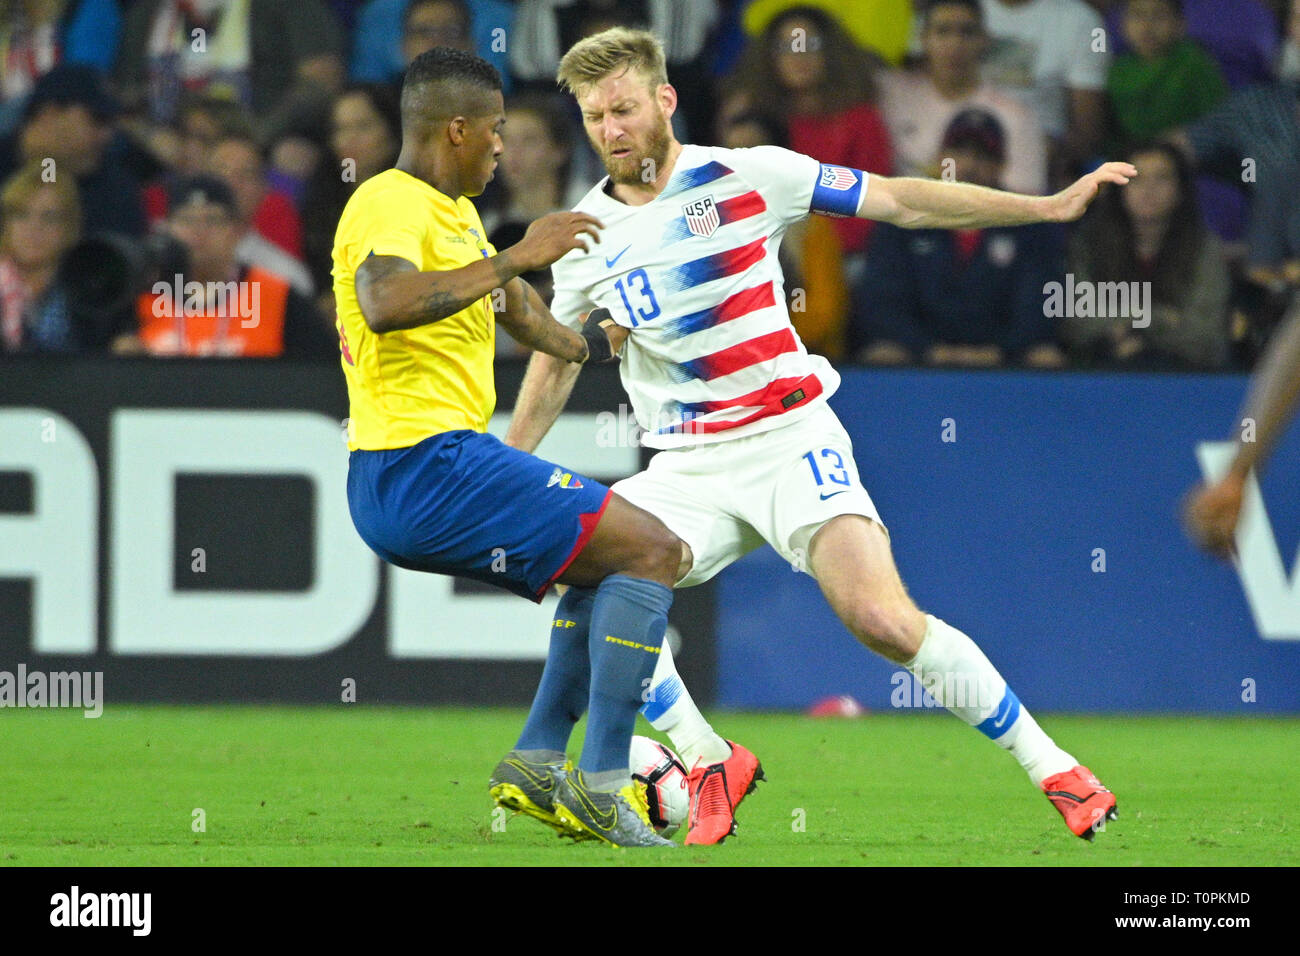 Orlando, Florida, USA. 21st Mar, 2019. US defender Tim Ream (13) and Ecuador midfielder Antonio Valencia (16) during an international friendly between the US and Ecuador at Orlando City Stadium on March 21, 2019 in Orlando, Florida. The US won the game 1-0. © 2019 Scott A. Miller. Credit: Scott A. Miller/ZUMA Wire/Alamy Live News Stock Photo